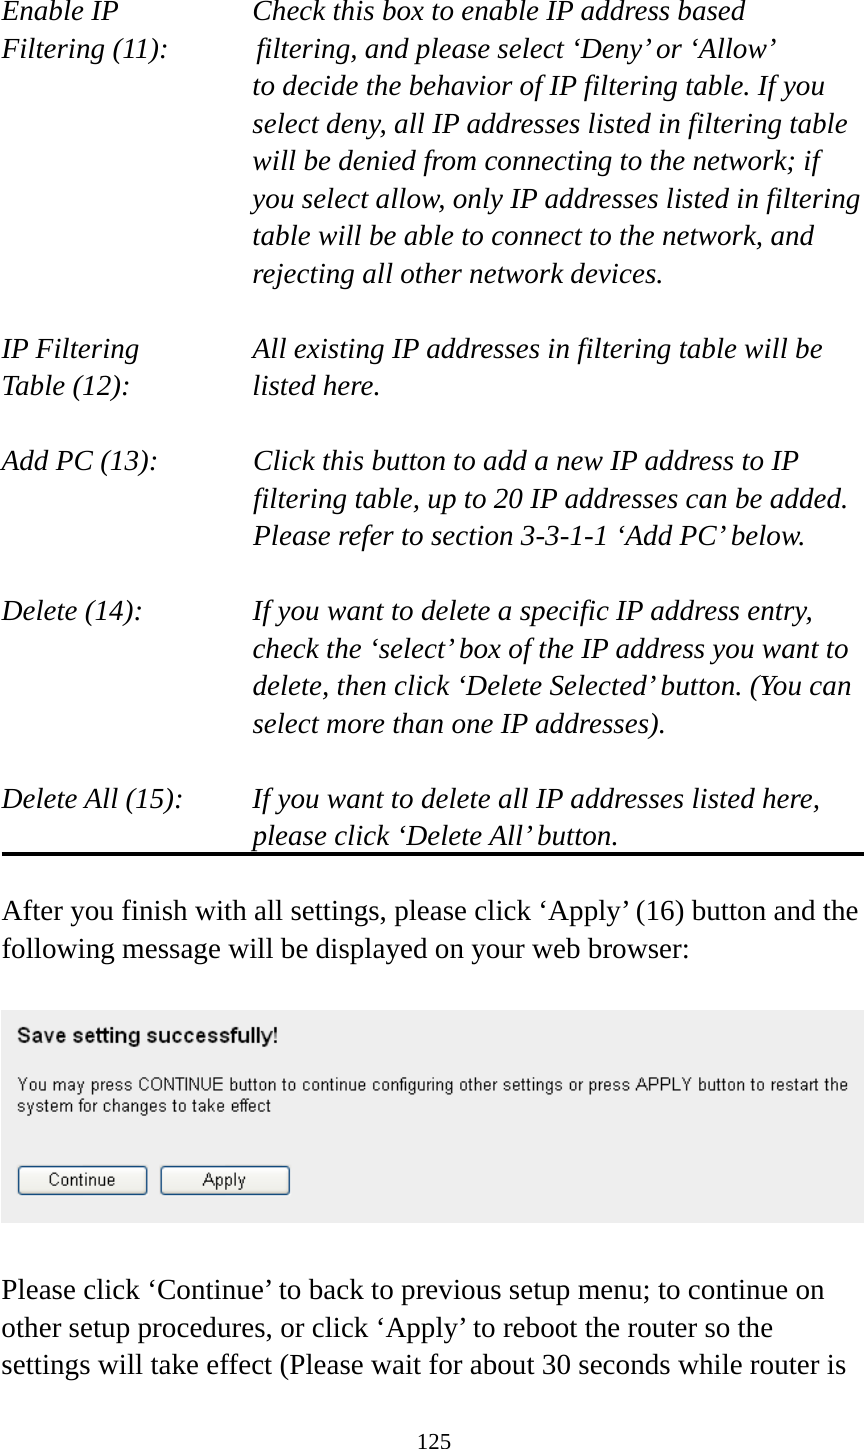 125  Enable IP        Check this box to enable IP address based Filtering (11):      filtering, and please select ‘Deny’ or ‘Allow’   to decide the behavior of IP filtering table. If you select deny, all IP addresses listed in filtering table will be denied from connecting to the network; if you select allow, only IP addresses listed in filtering table will be able to connect to the network, and rejecting all other network devices.  IP Filtering      All existing IP addresses in filtering table will be Table (12):       listed here.  Add PC (13):    Click this button to add a new IP address to IP filtering table, up to 20 IP addresses can be added.   Please refer to section 3-3-1-1 ‘Add PC’ below.    Delete (14):      If you want to delete a specific IP address entry,     check the ‘select’ box of the IP address you want to delete, then click ‘Delete Selected’ button. (You can select more than one IP addresses).  Delete All (15):    If you want to delete all IP addresses listed here, please click ‘Delete All’ button.  After you finish with all settings, please click ‘Apply’ (16) button and the following message will be displayed on your web browser:    Please click ‘Continue’ to back to previous setup menu; to continue on other setup procedures, or click ‘Apply’ to reboot the router so the settings will take effect (Please wait for about 30 seconds while router is 